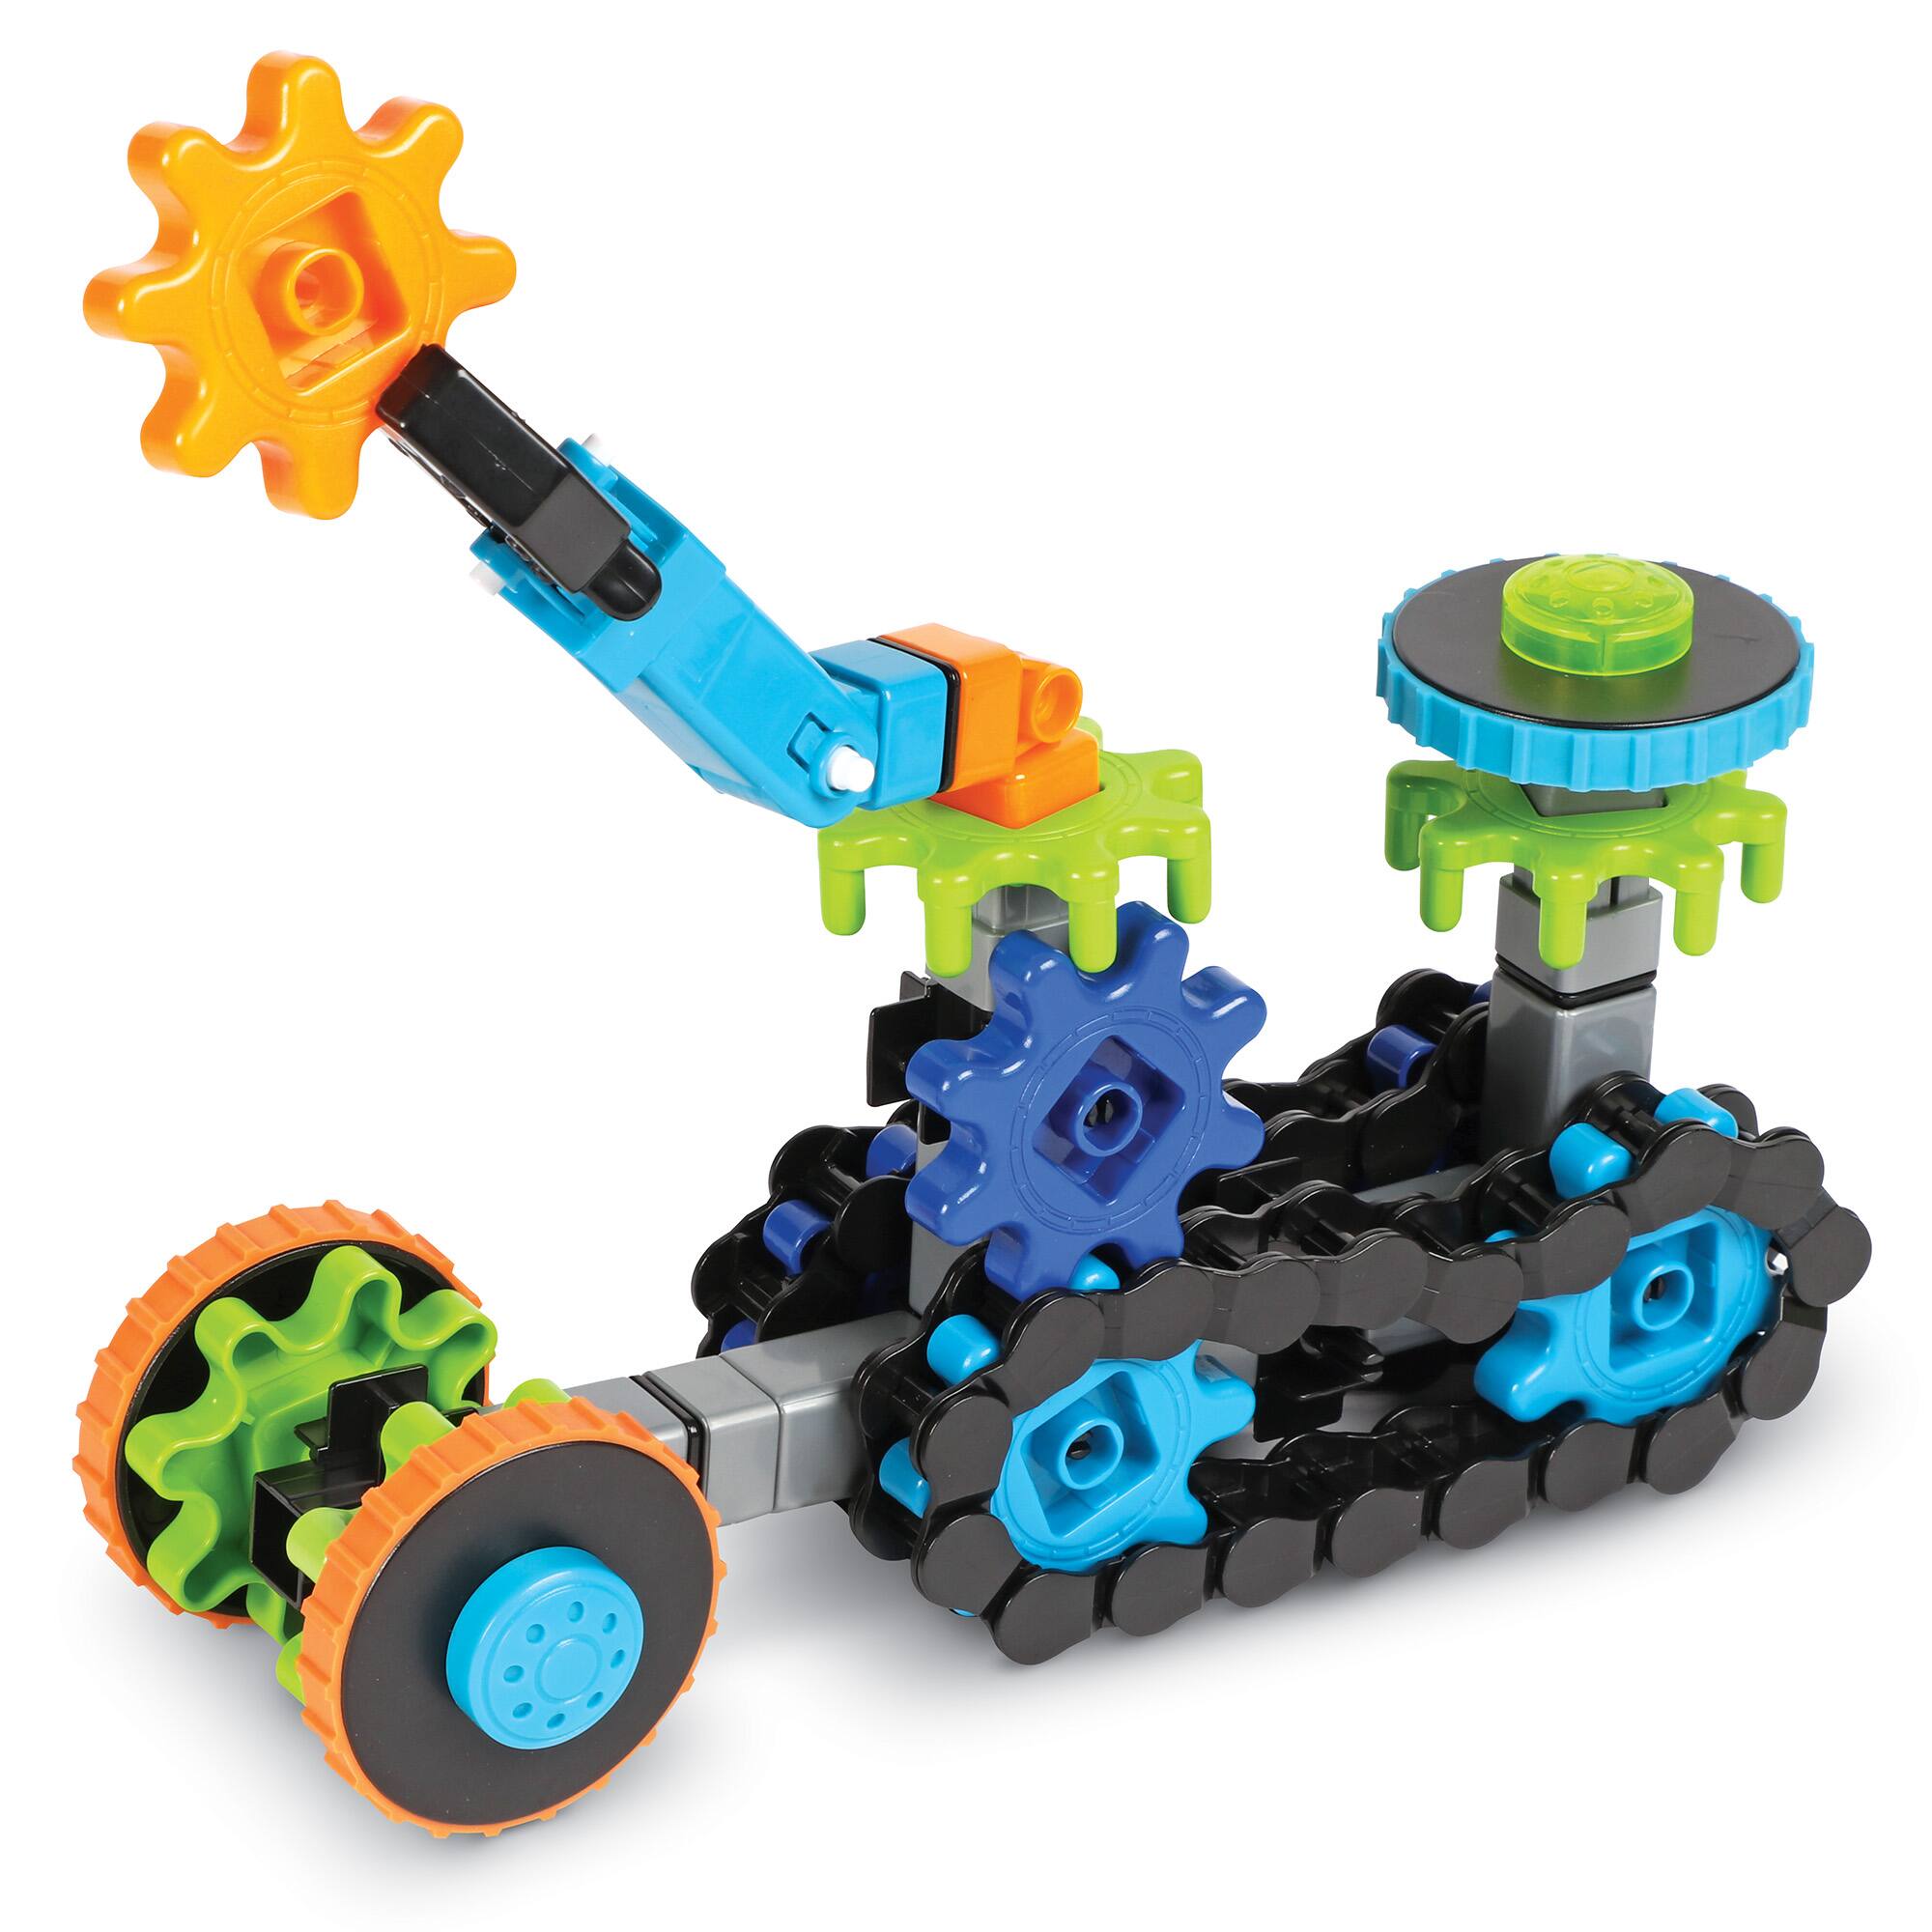 Learning Resources Gears! Gears! Gears! Robots in Motion Building Set